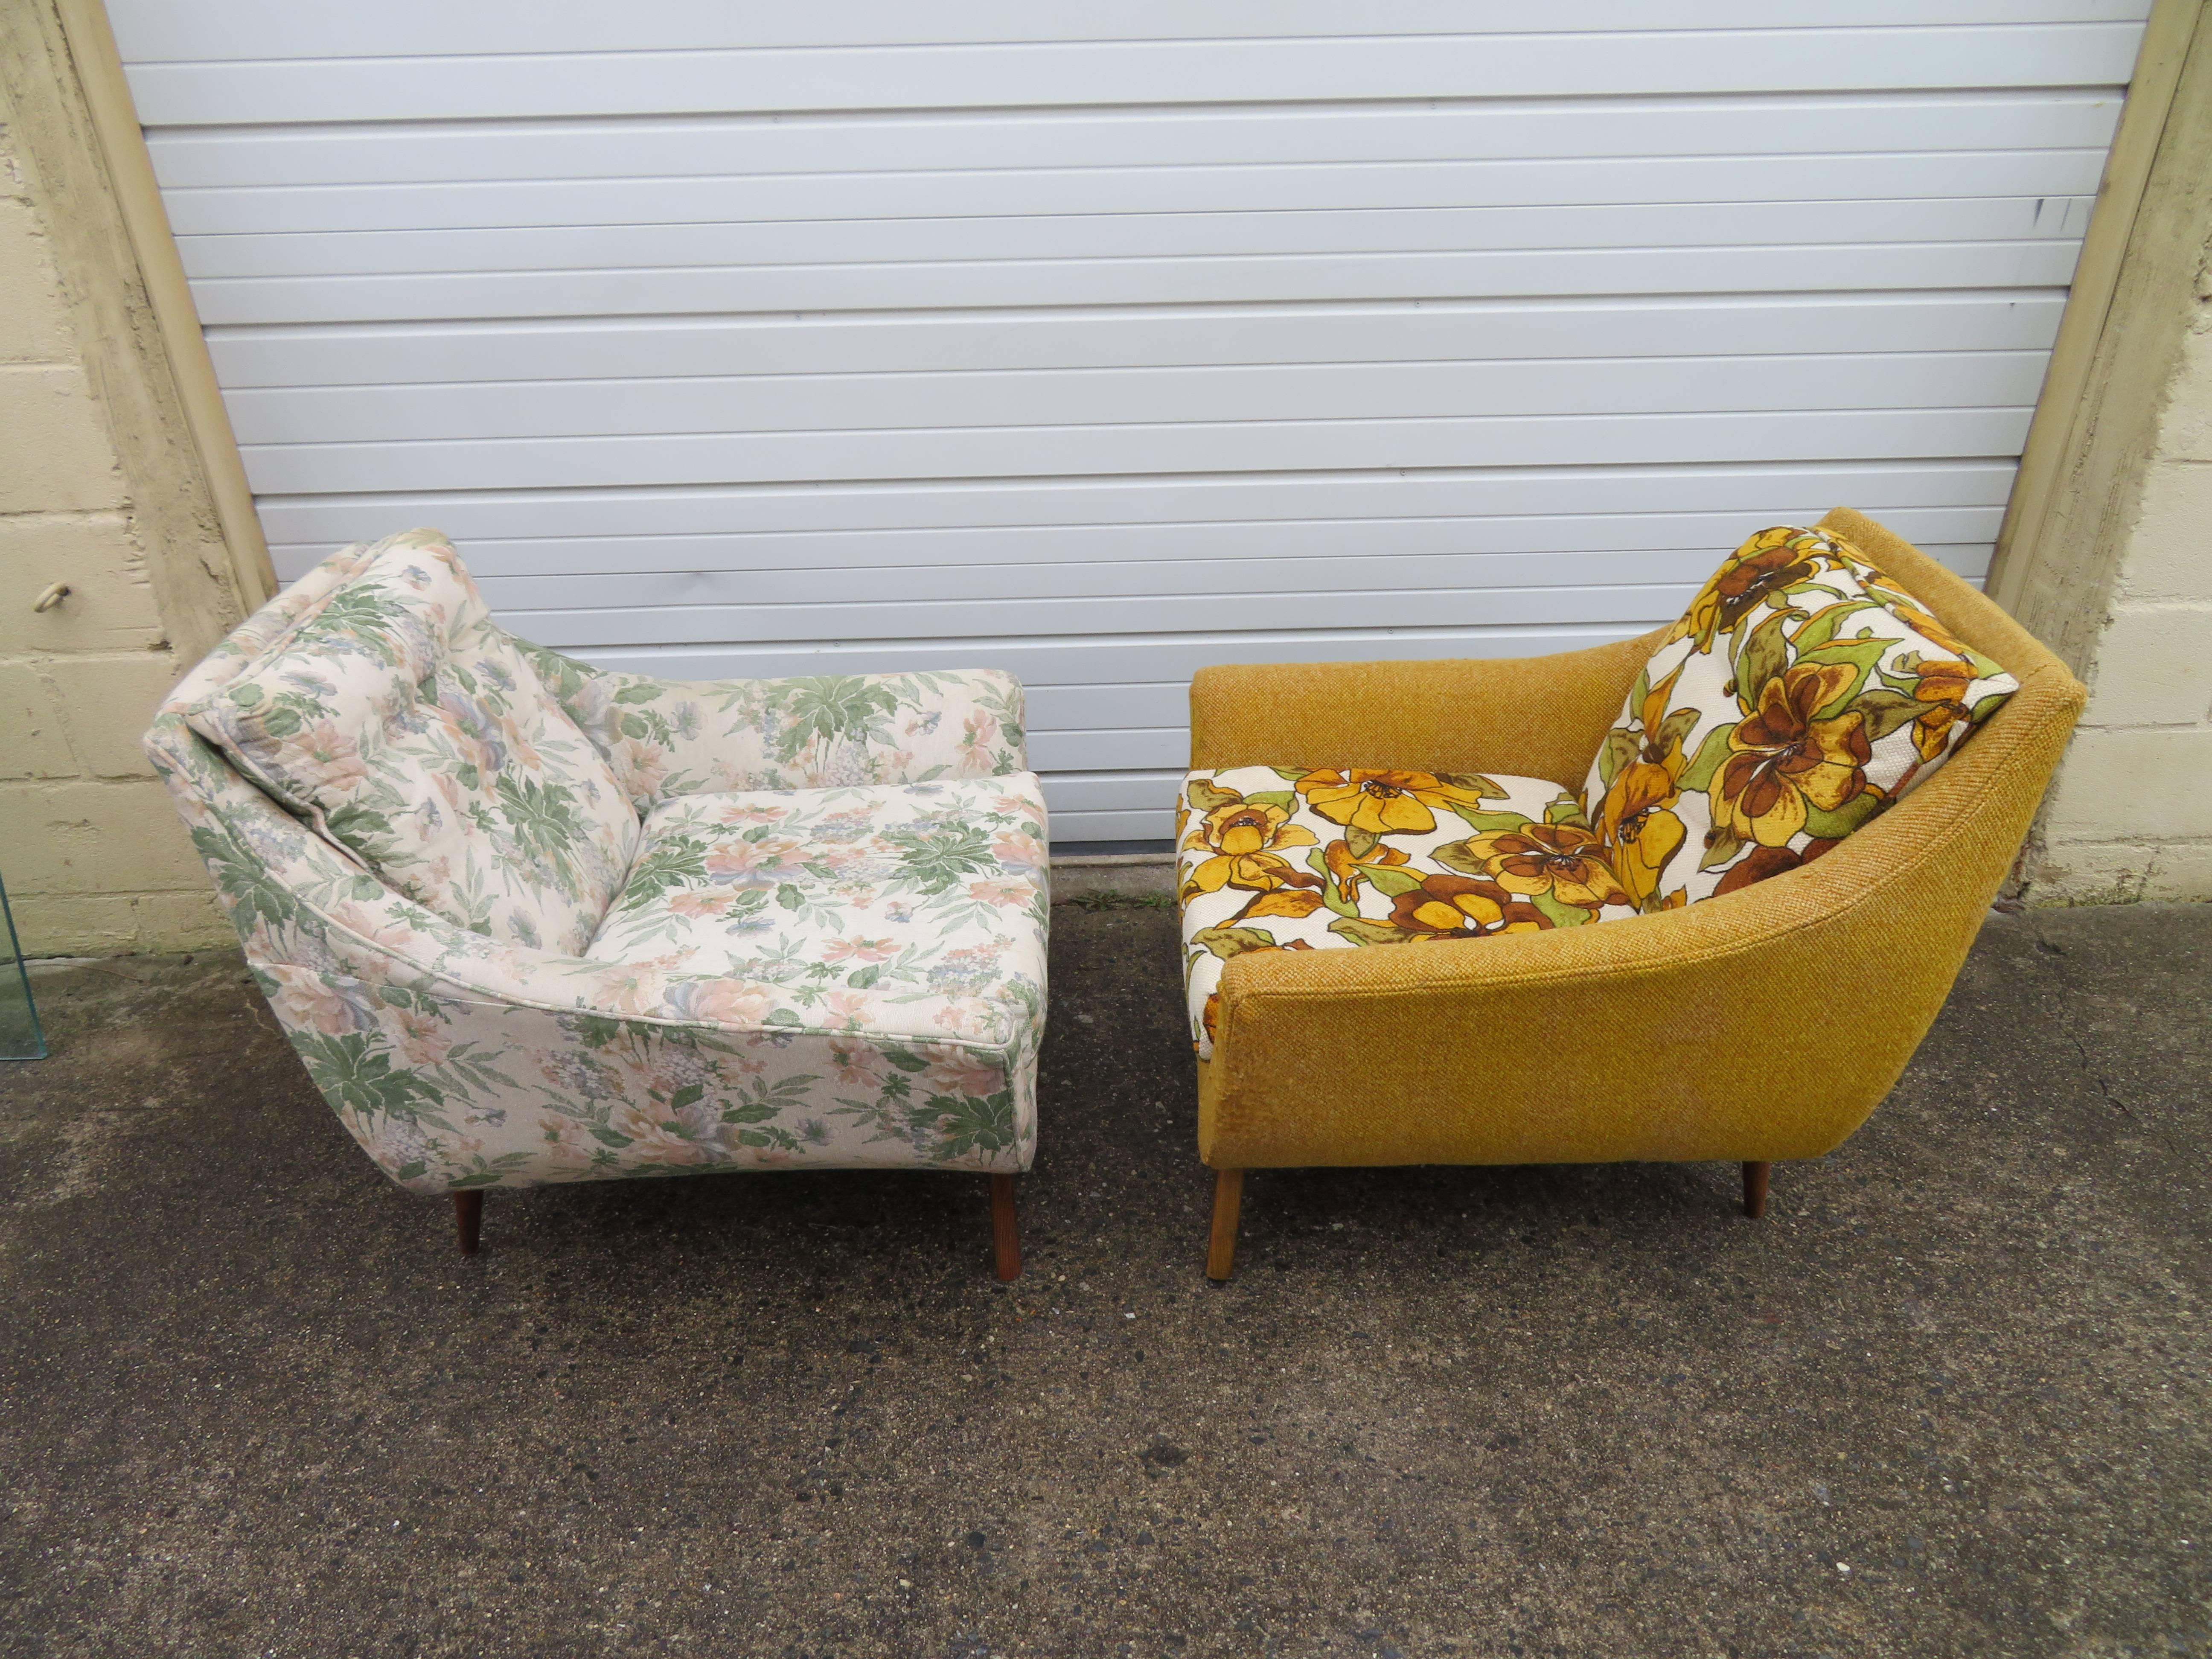 Lovely pair of American Mid-Century Modern lounge chairs with great low scooped arms. These chairs are in un-restored condition and will need new upholstery. We do have an upholstery service if needed and would love to help bring these Mid-Century